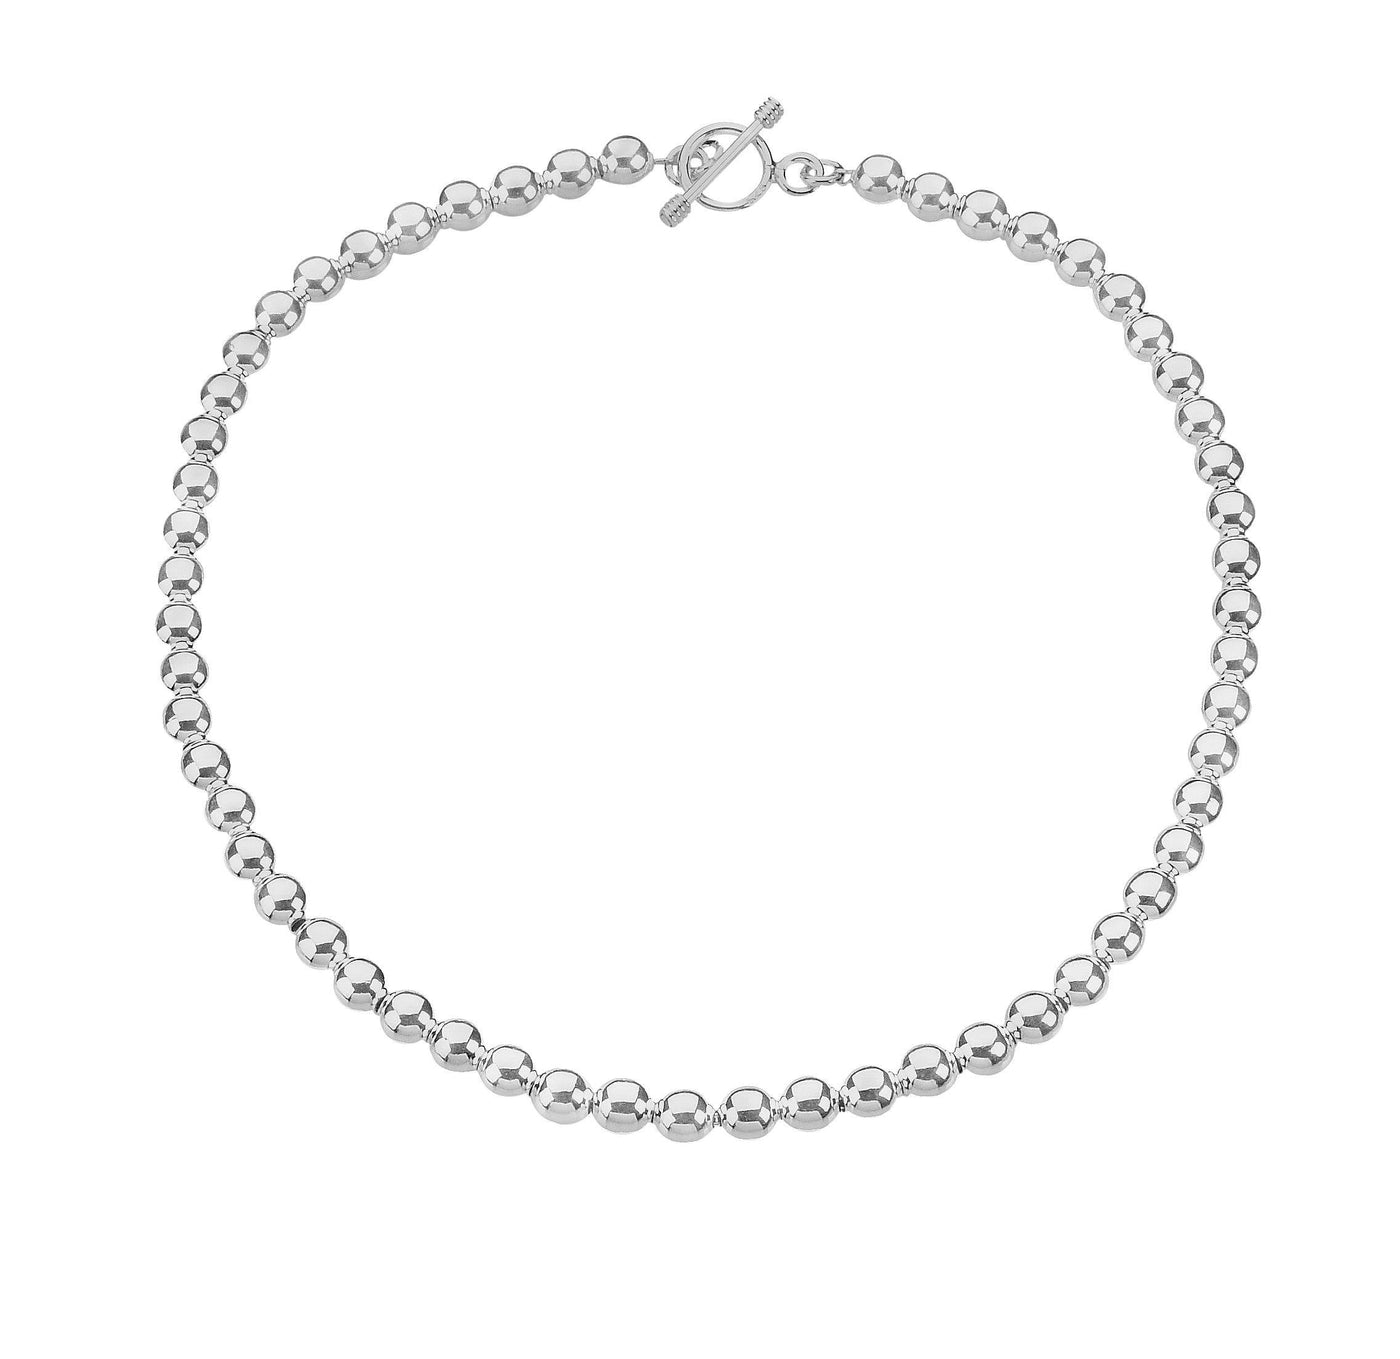 8mm Sterling Silver Beads Necklace - Rococo Jewellery